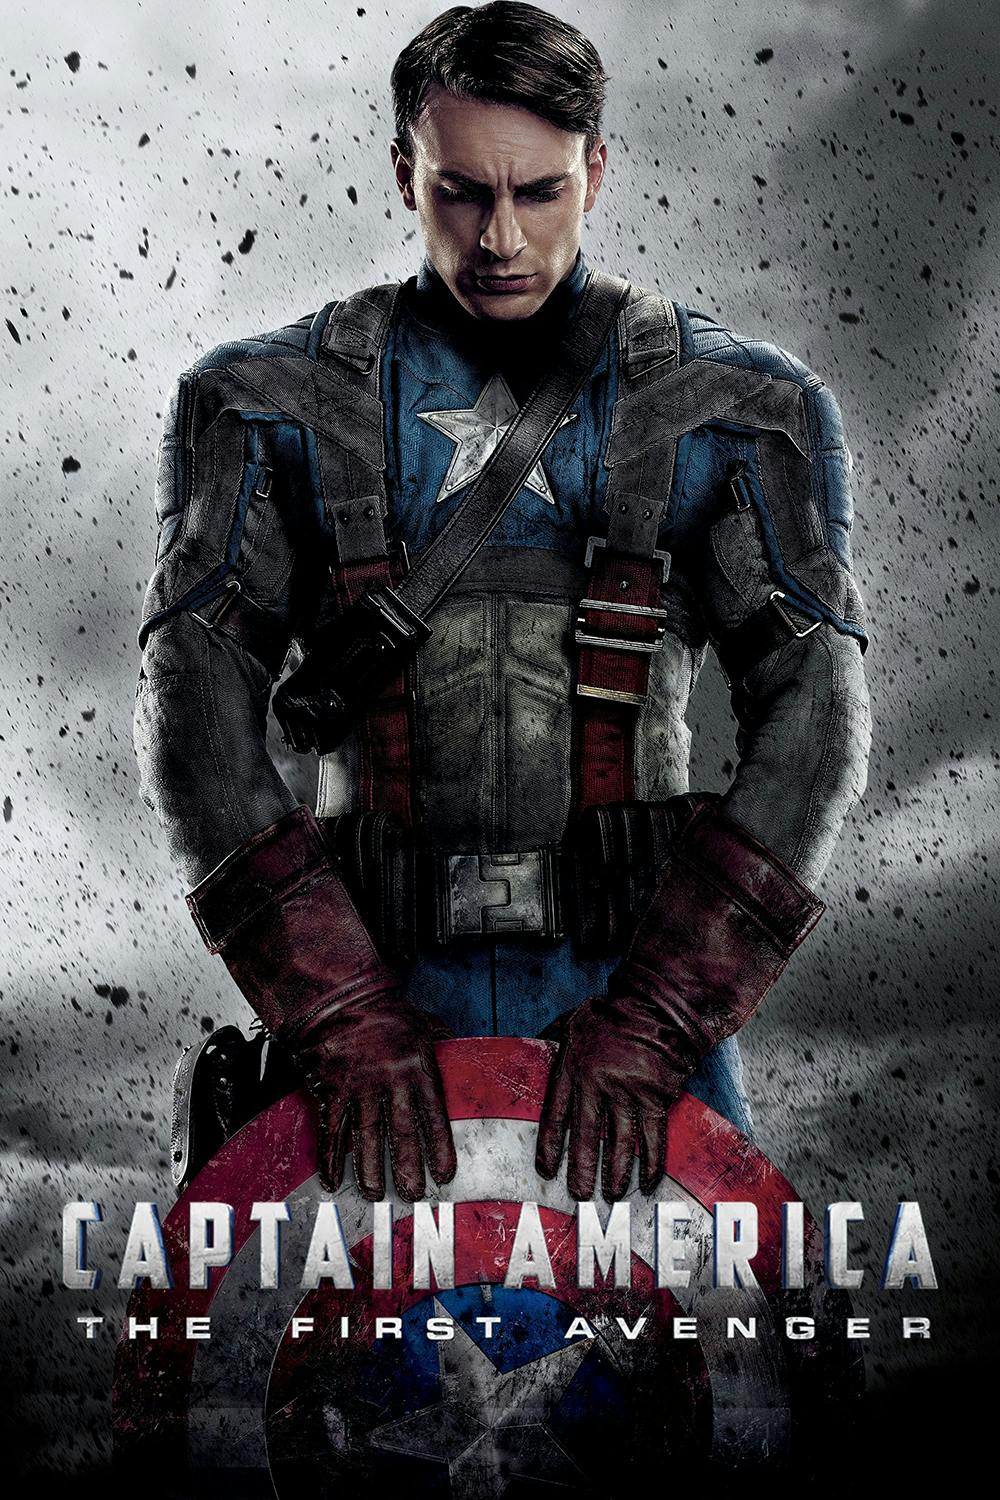 Best Chris Evans movies to watch on Amazon or iTunes